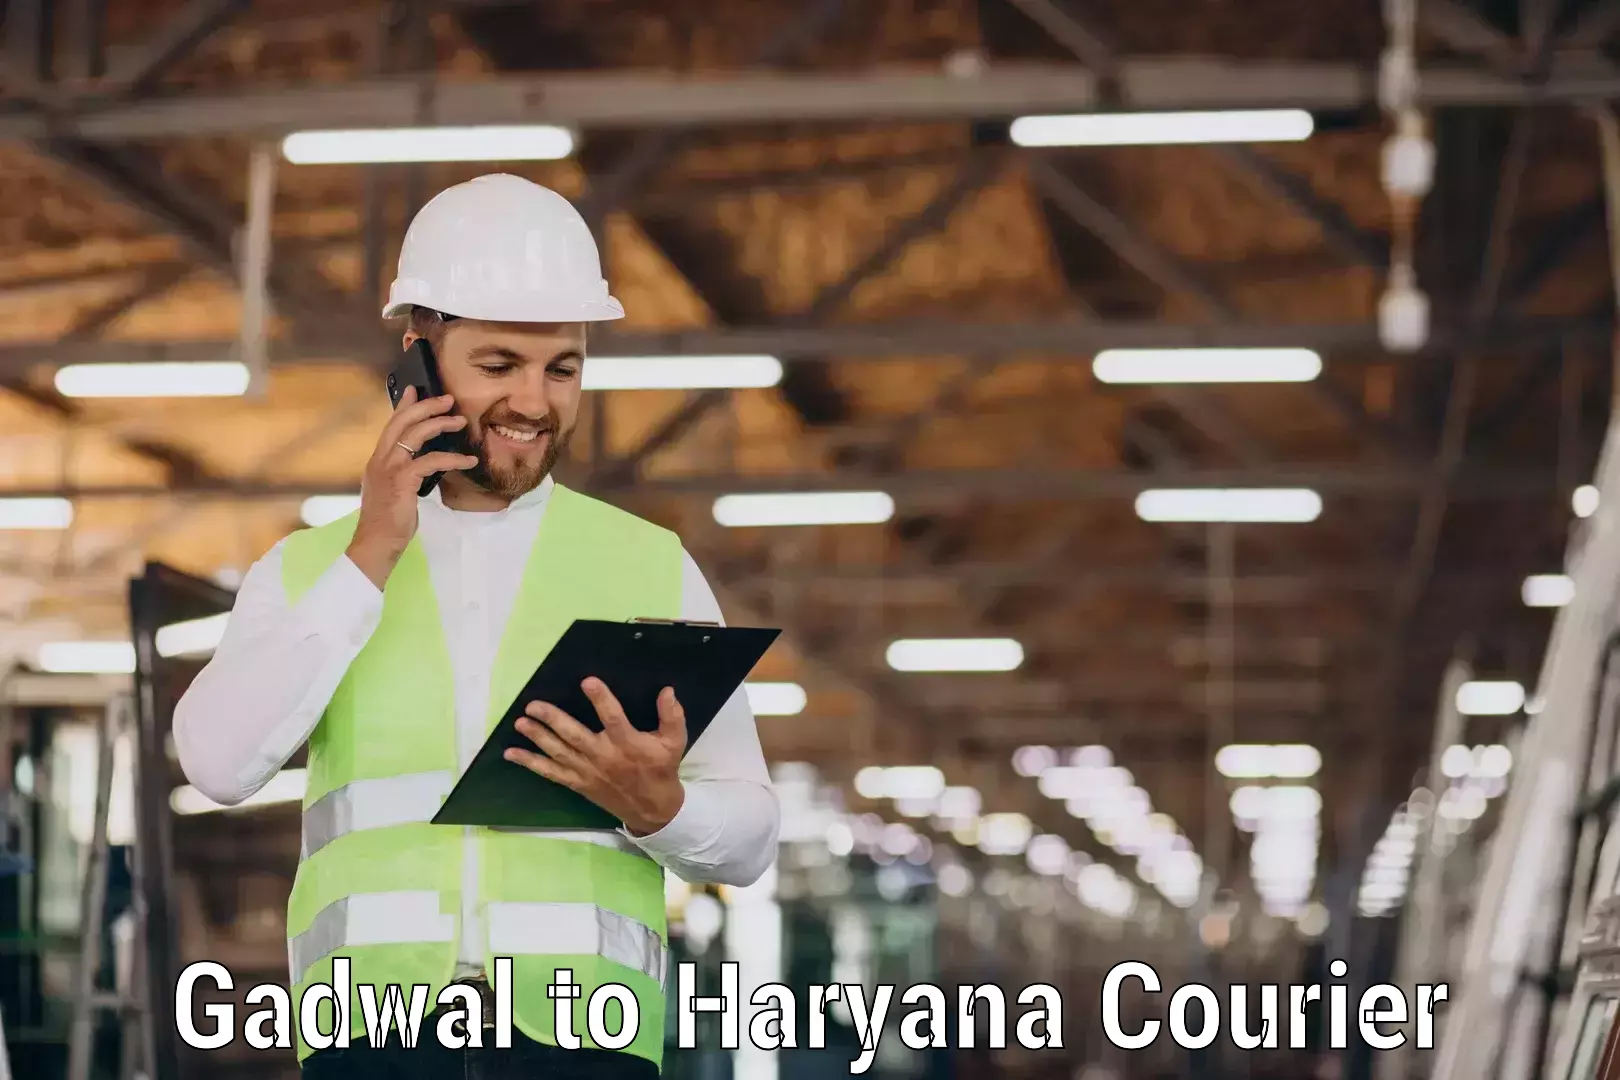 Bulk courier orders in Gadwal to Chaudhary Charan Singh Haryana Agricultural University Hisar